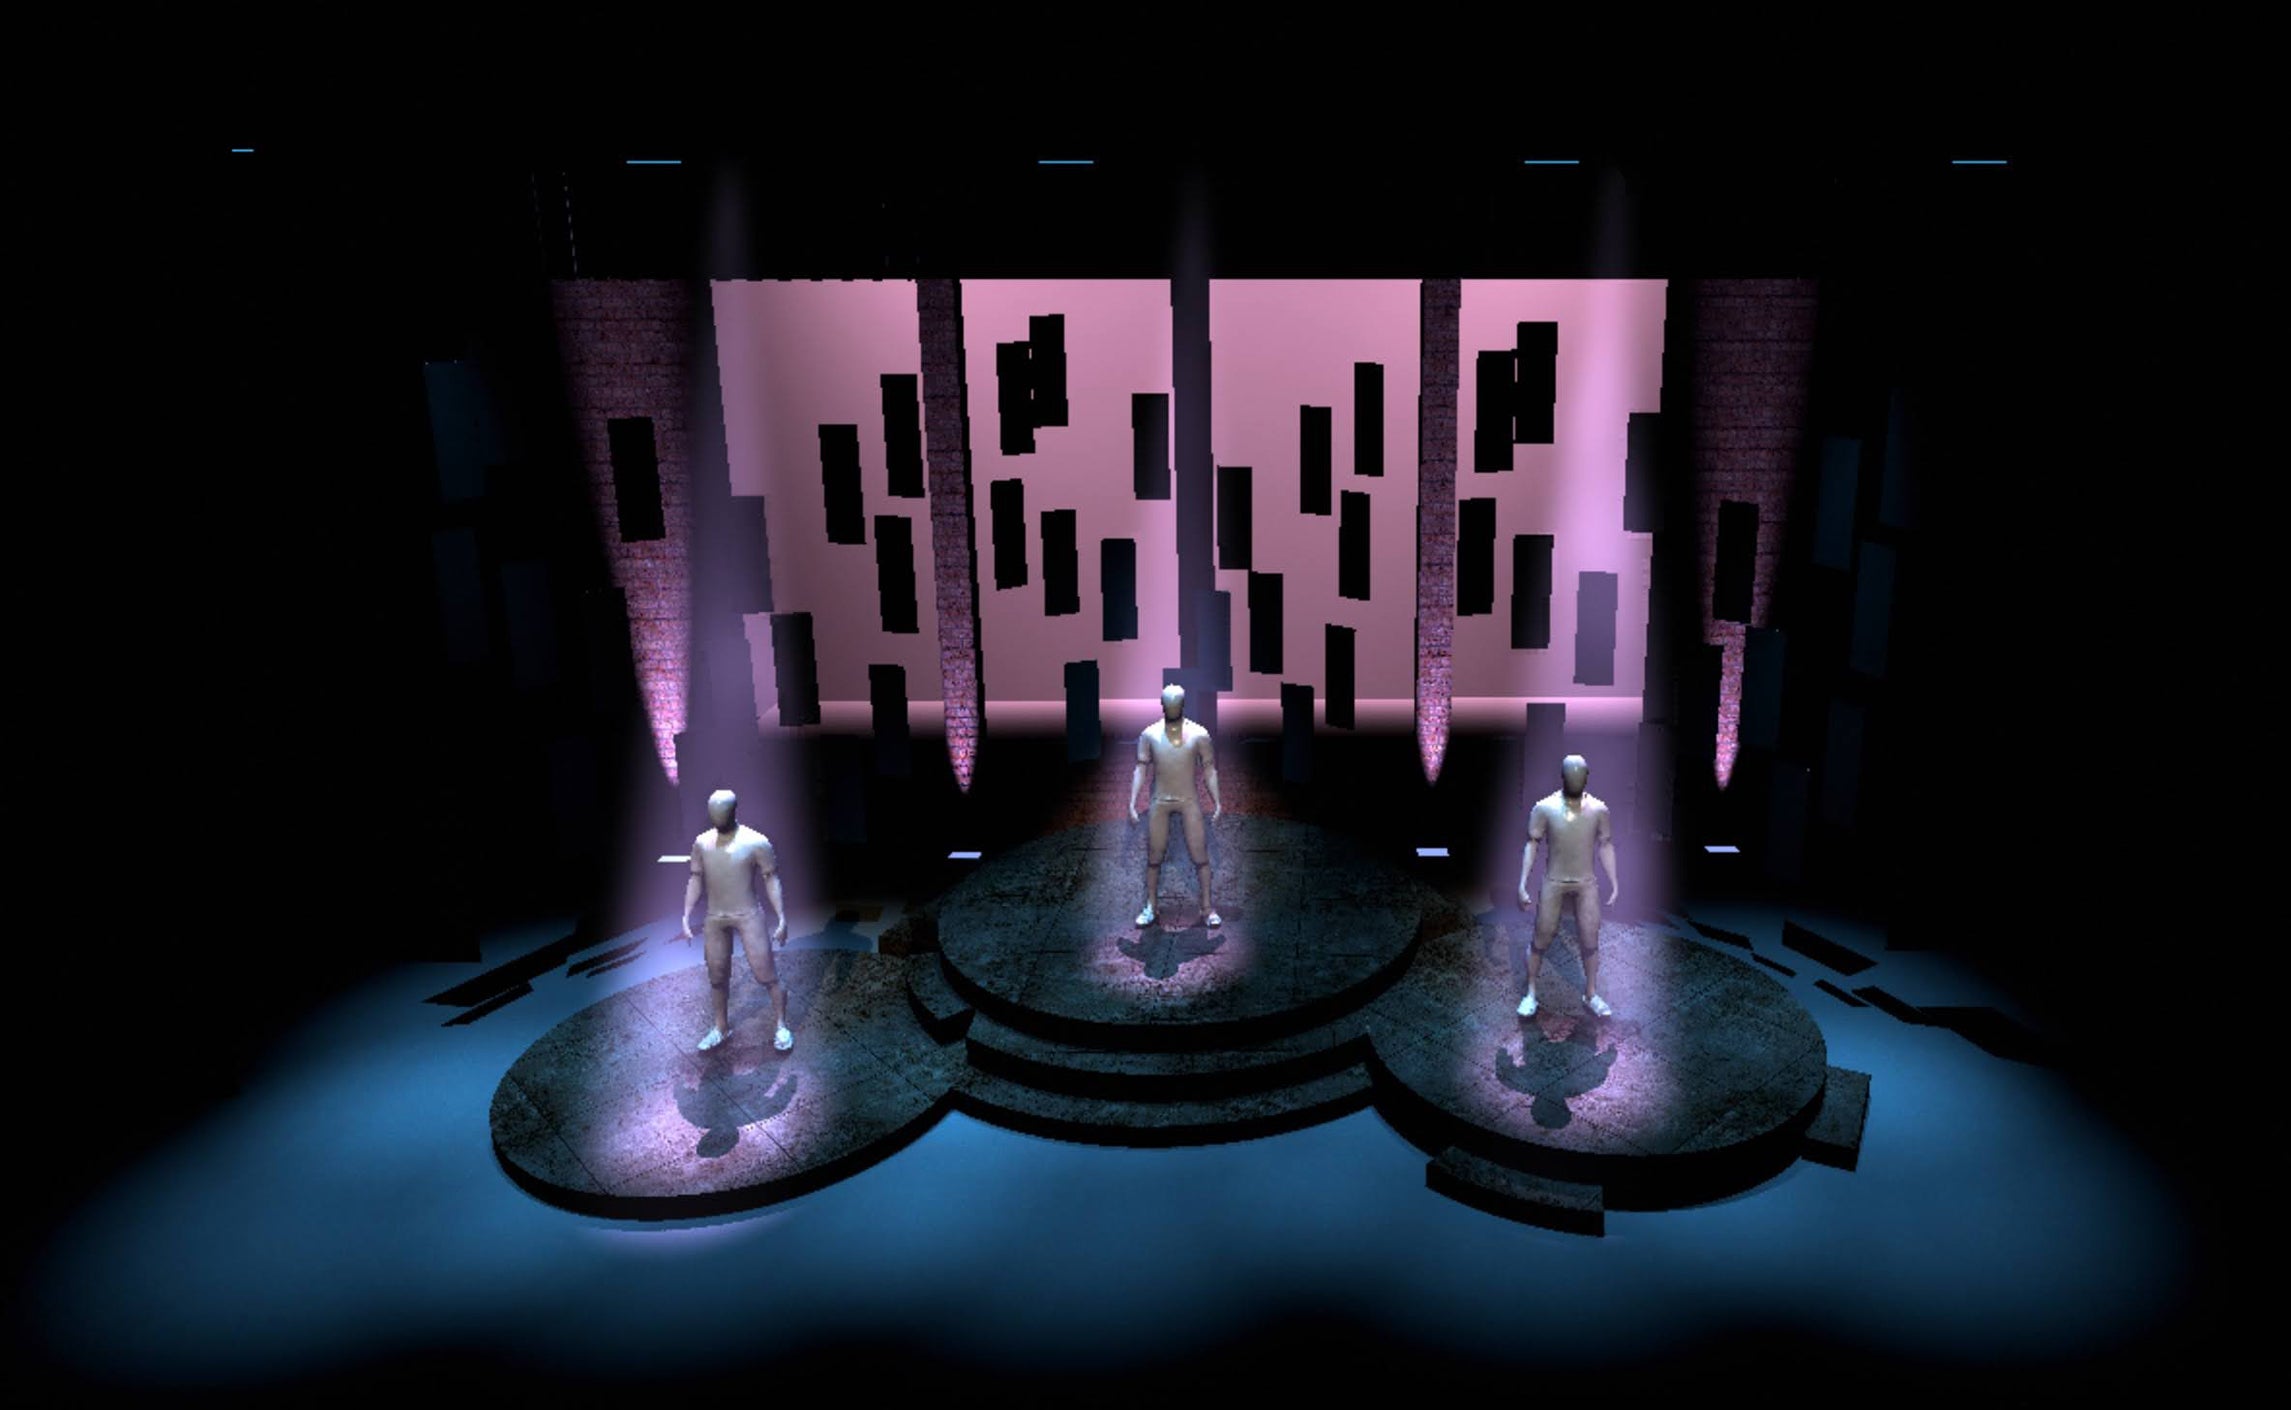 3-D model of the set with rendered figures and lights shining from above.